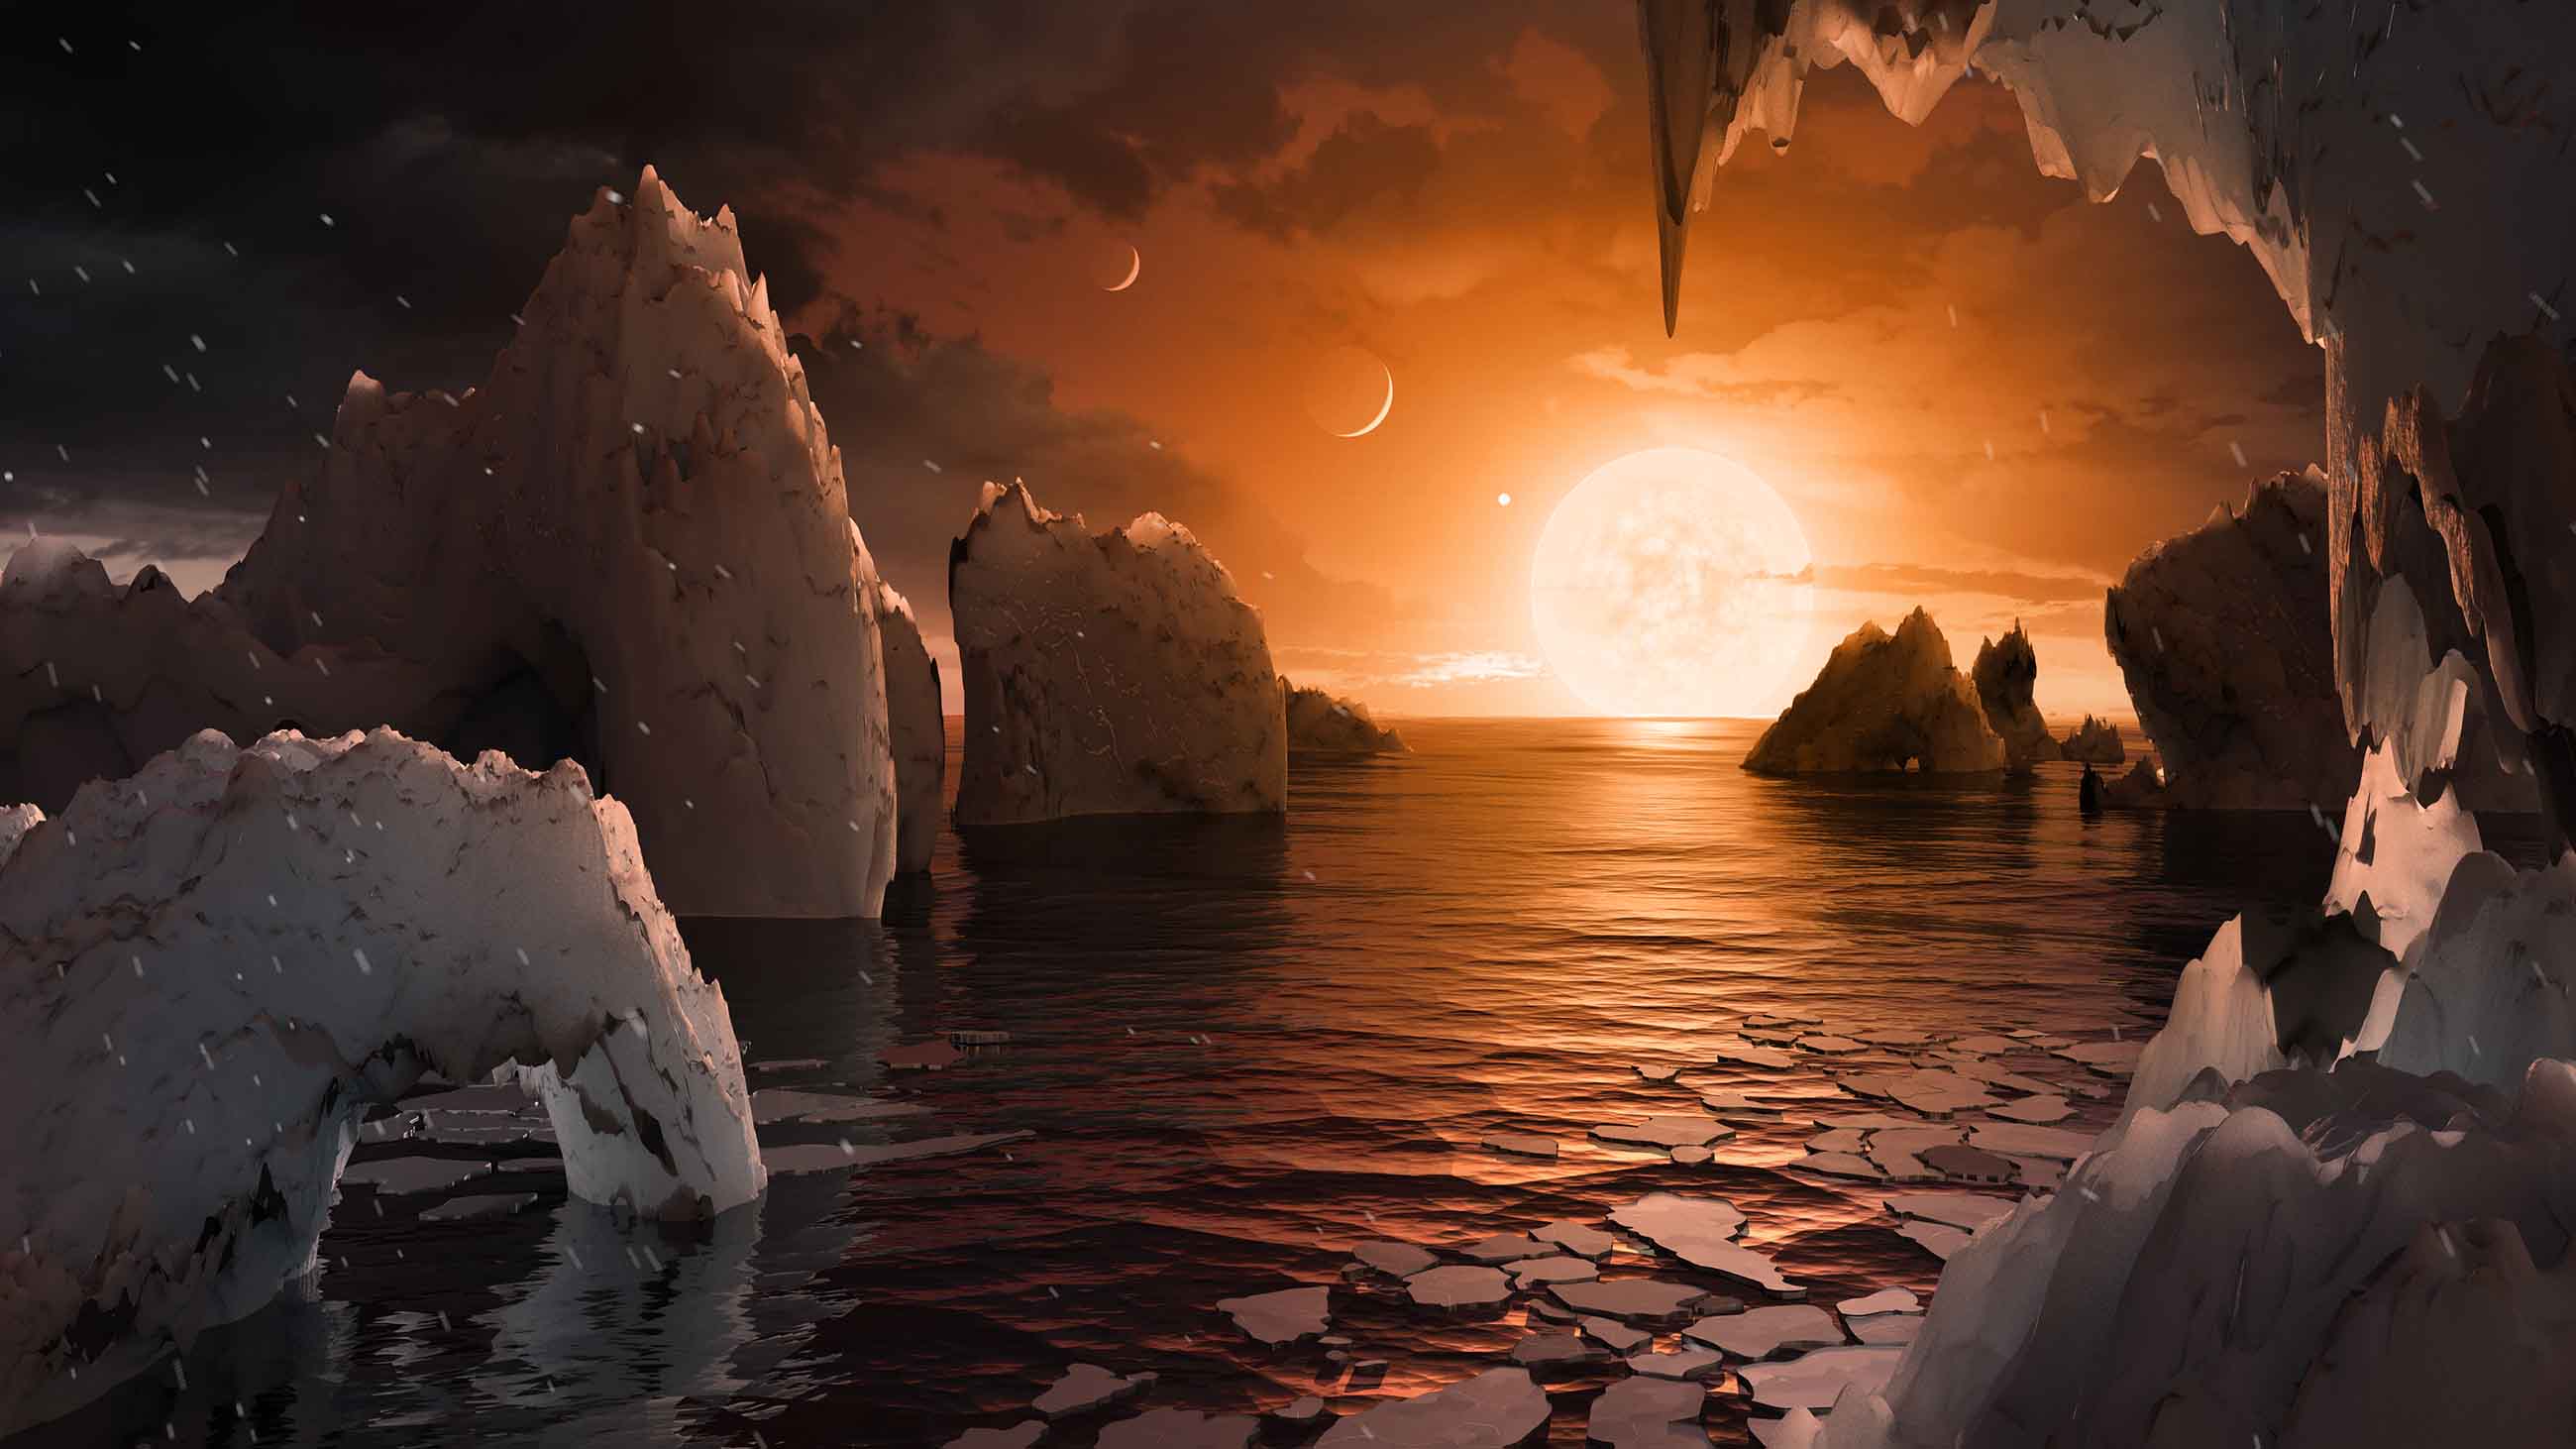 Astronomers have discovered a new solar system with seven Earth-sized planets.